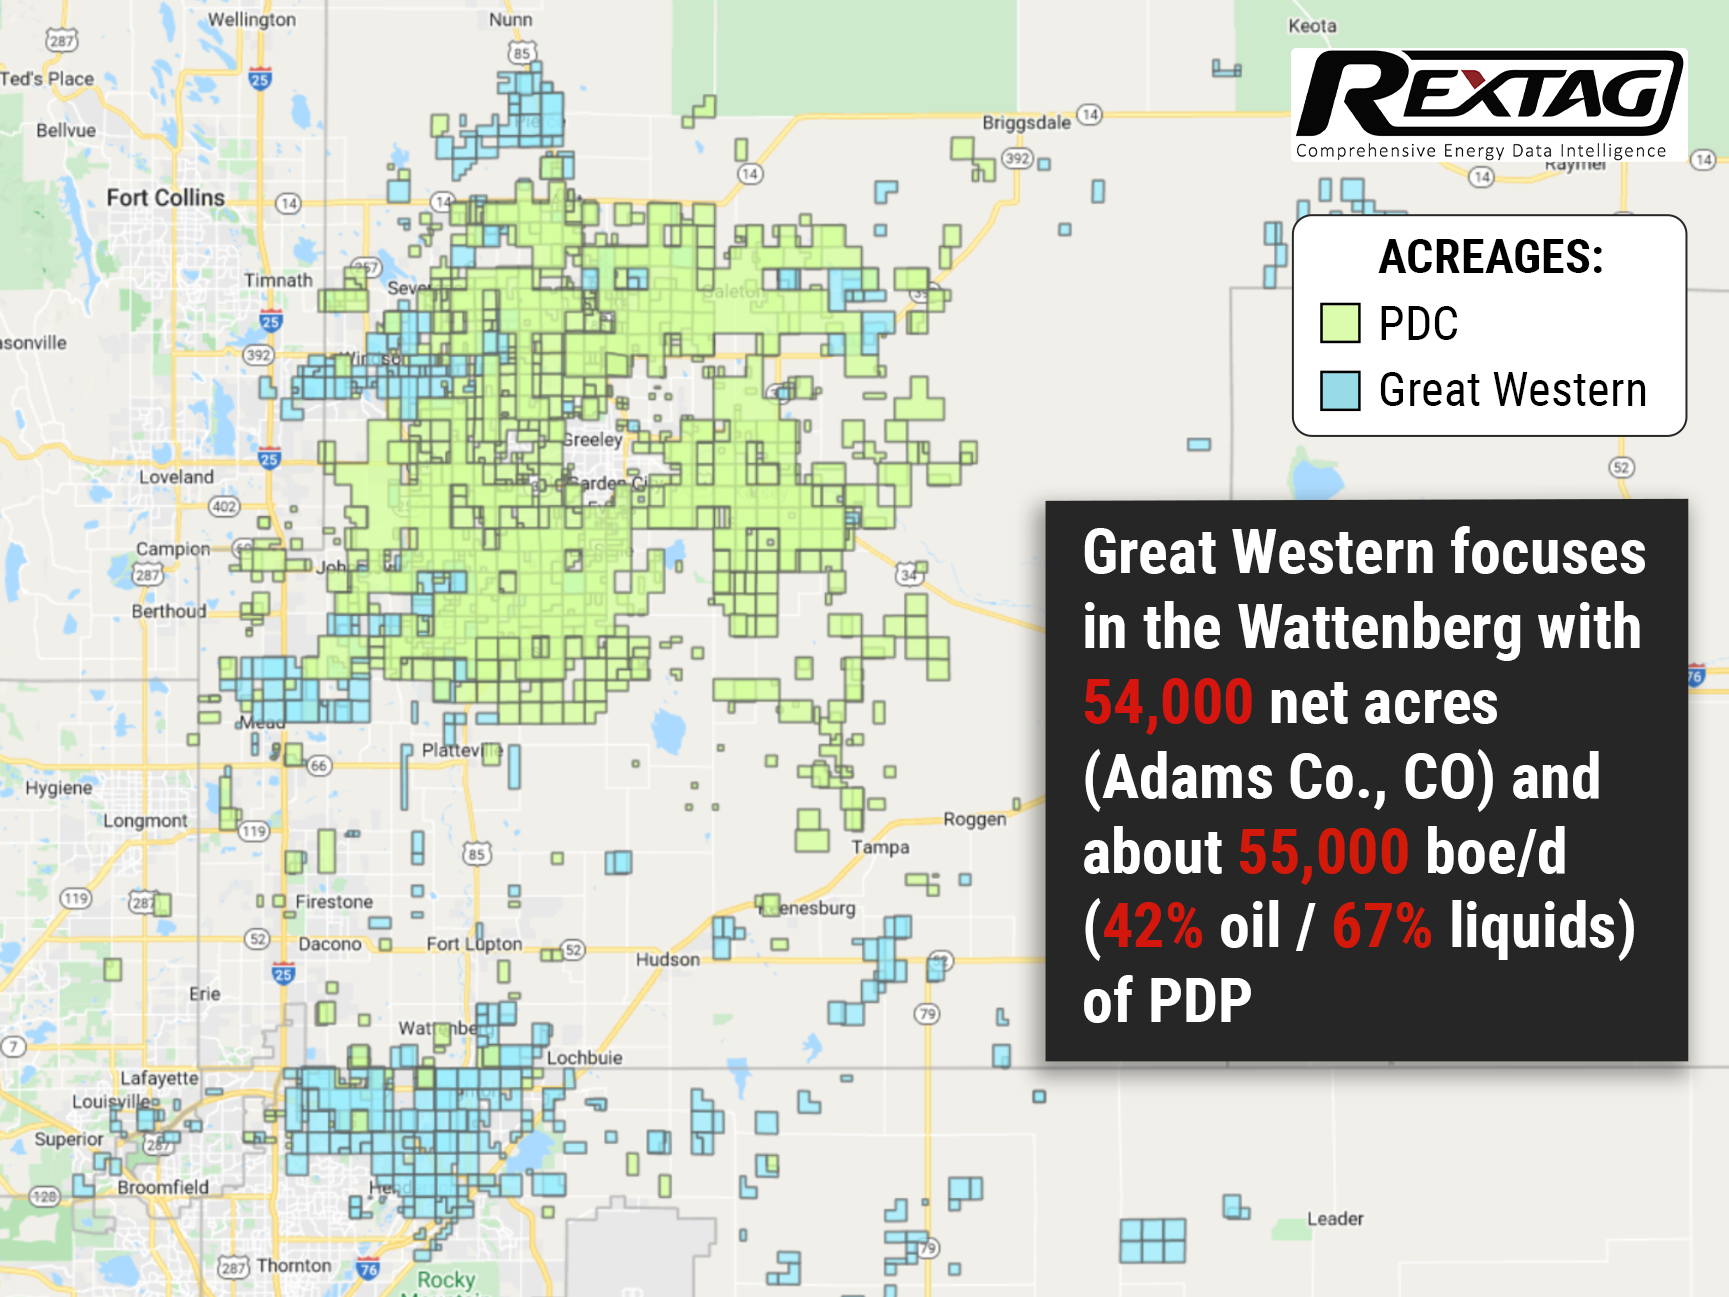 All-Eyes-Are-on-the-Rocky-Mountains-State-as-PDC-Acquires-Great-Western-for-$1.3B